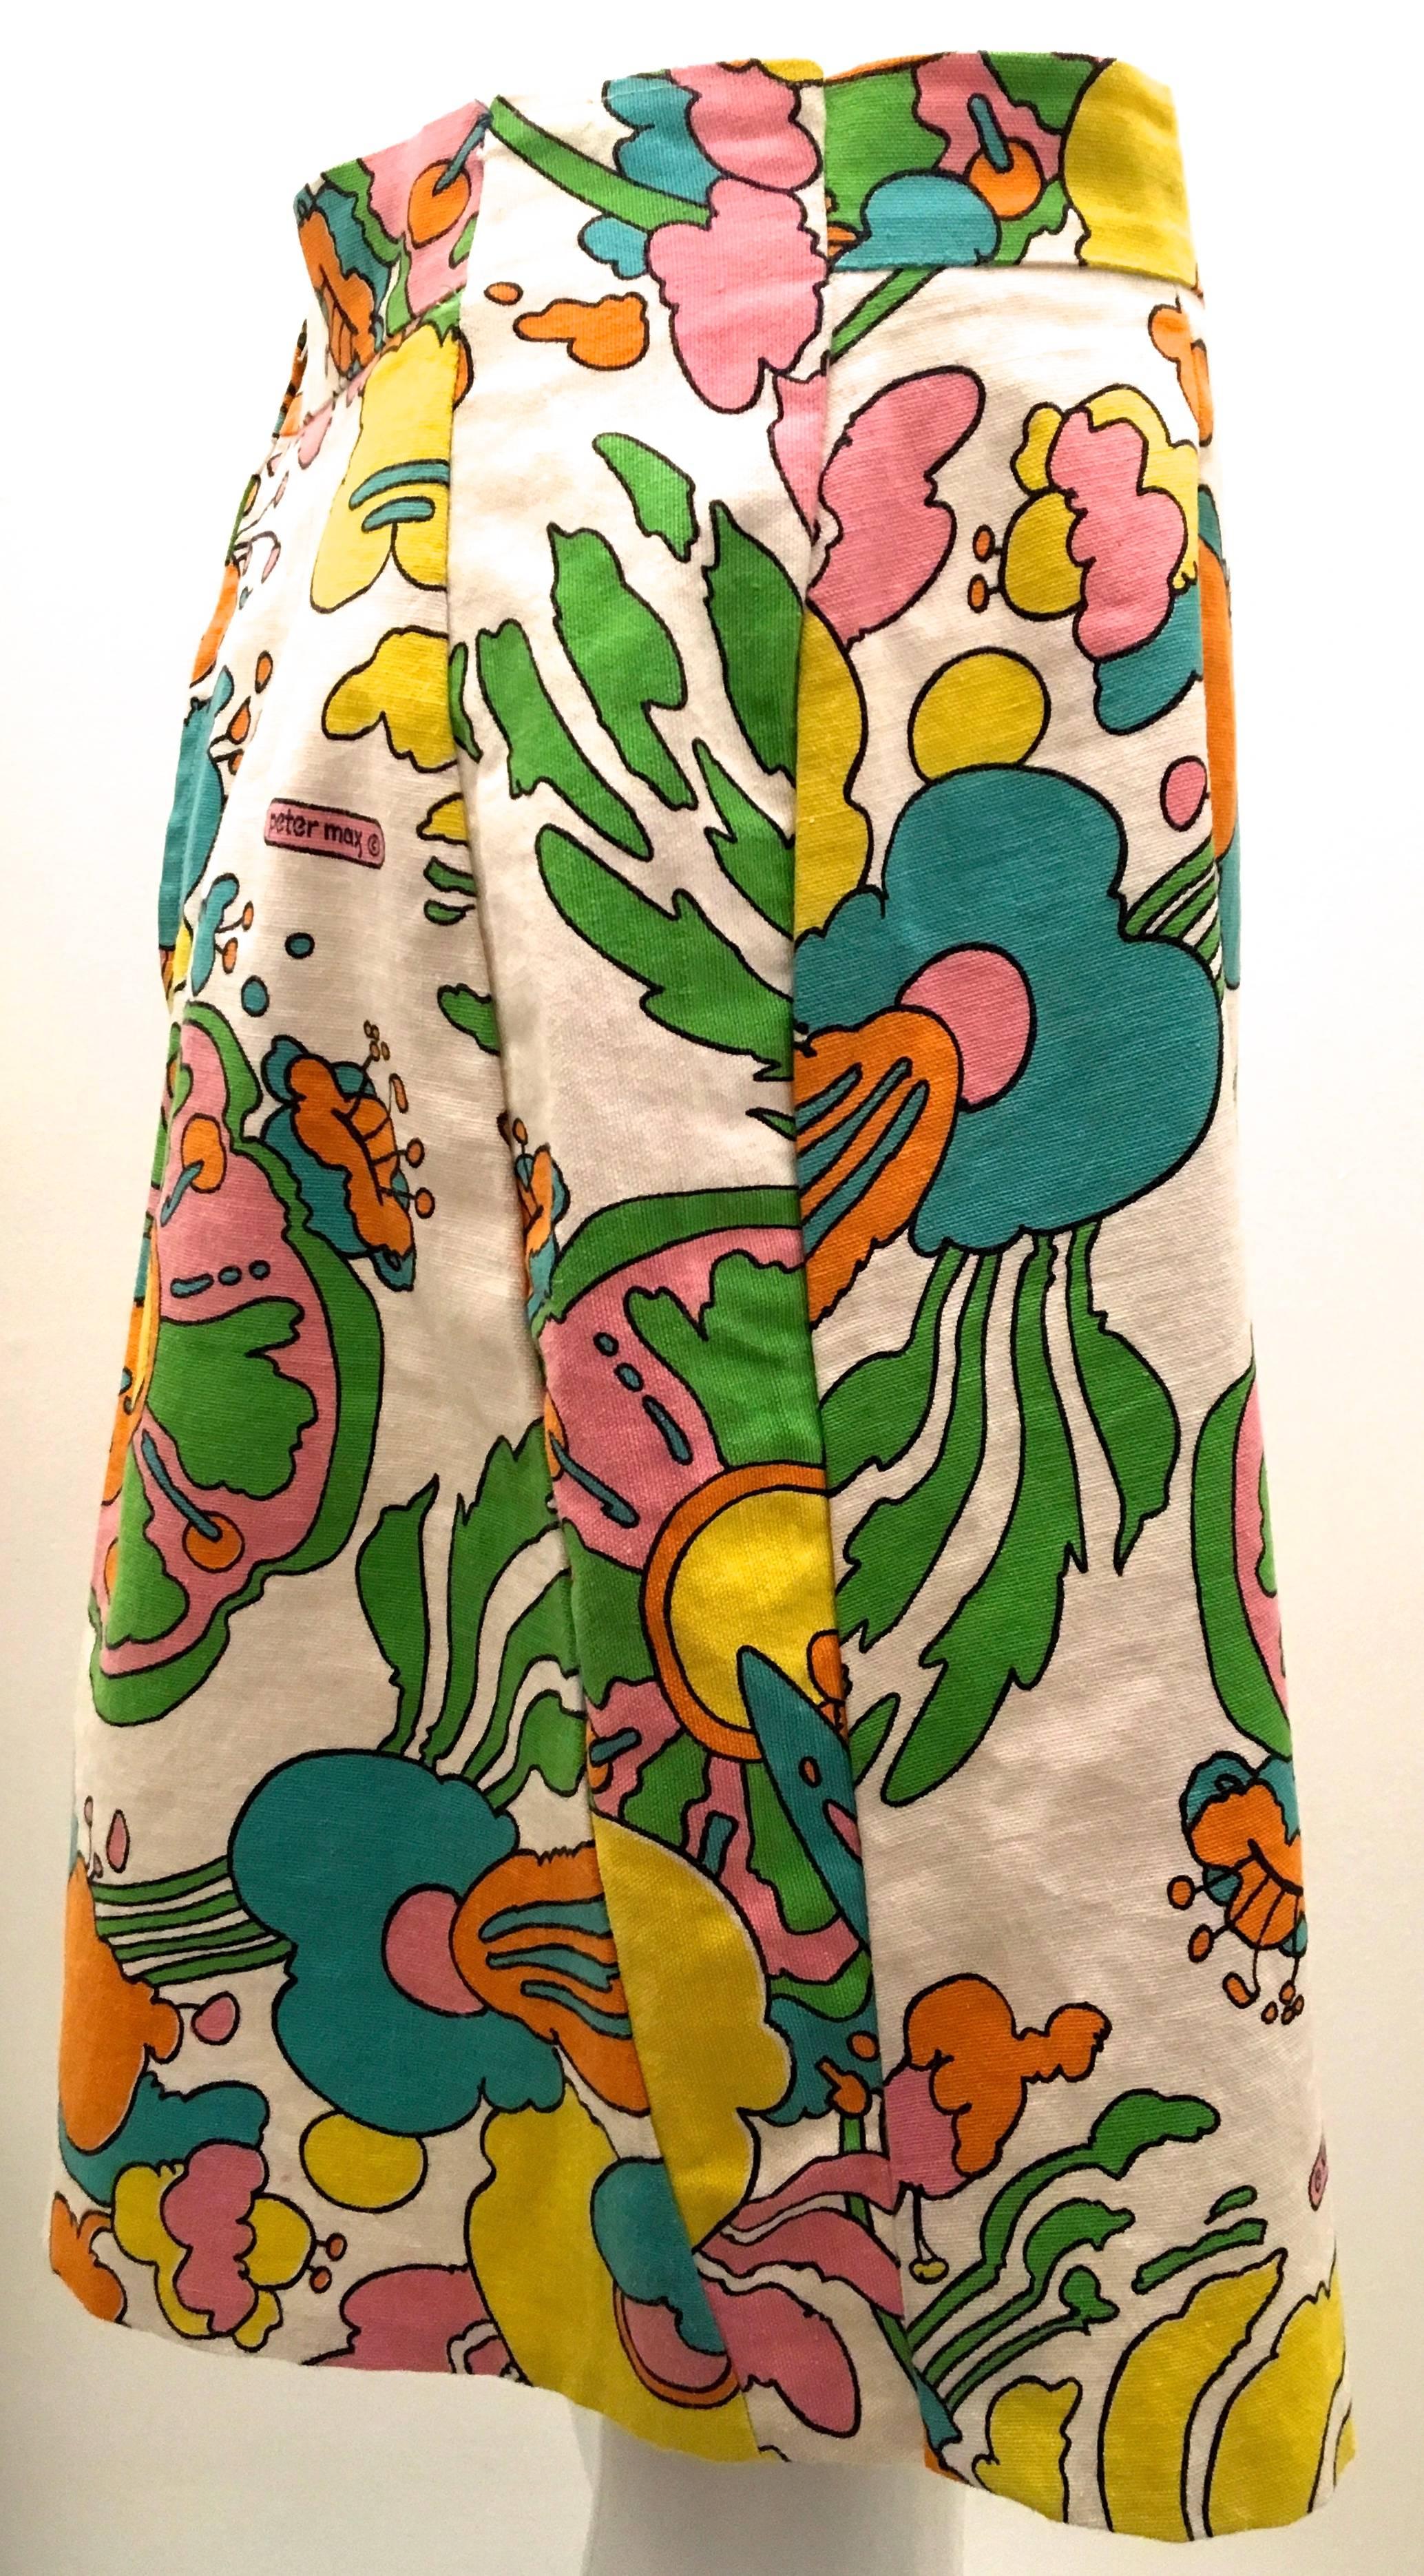 Presented here is a beautiful skirt from the late 1960’s / early 1970’s. The iconic Peter Max vibrant fabric is a fabulous example of this era. Peter Max’s art was influential throughout this era in the realm of the psychedelic movement and culture